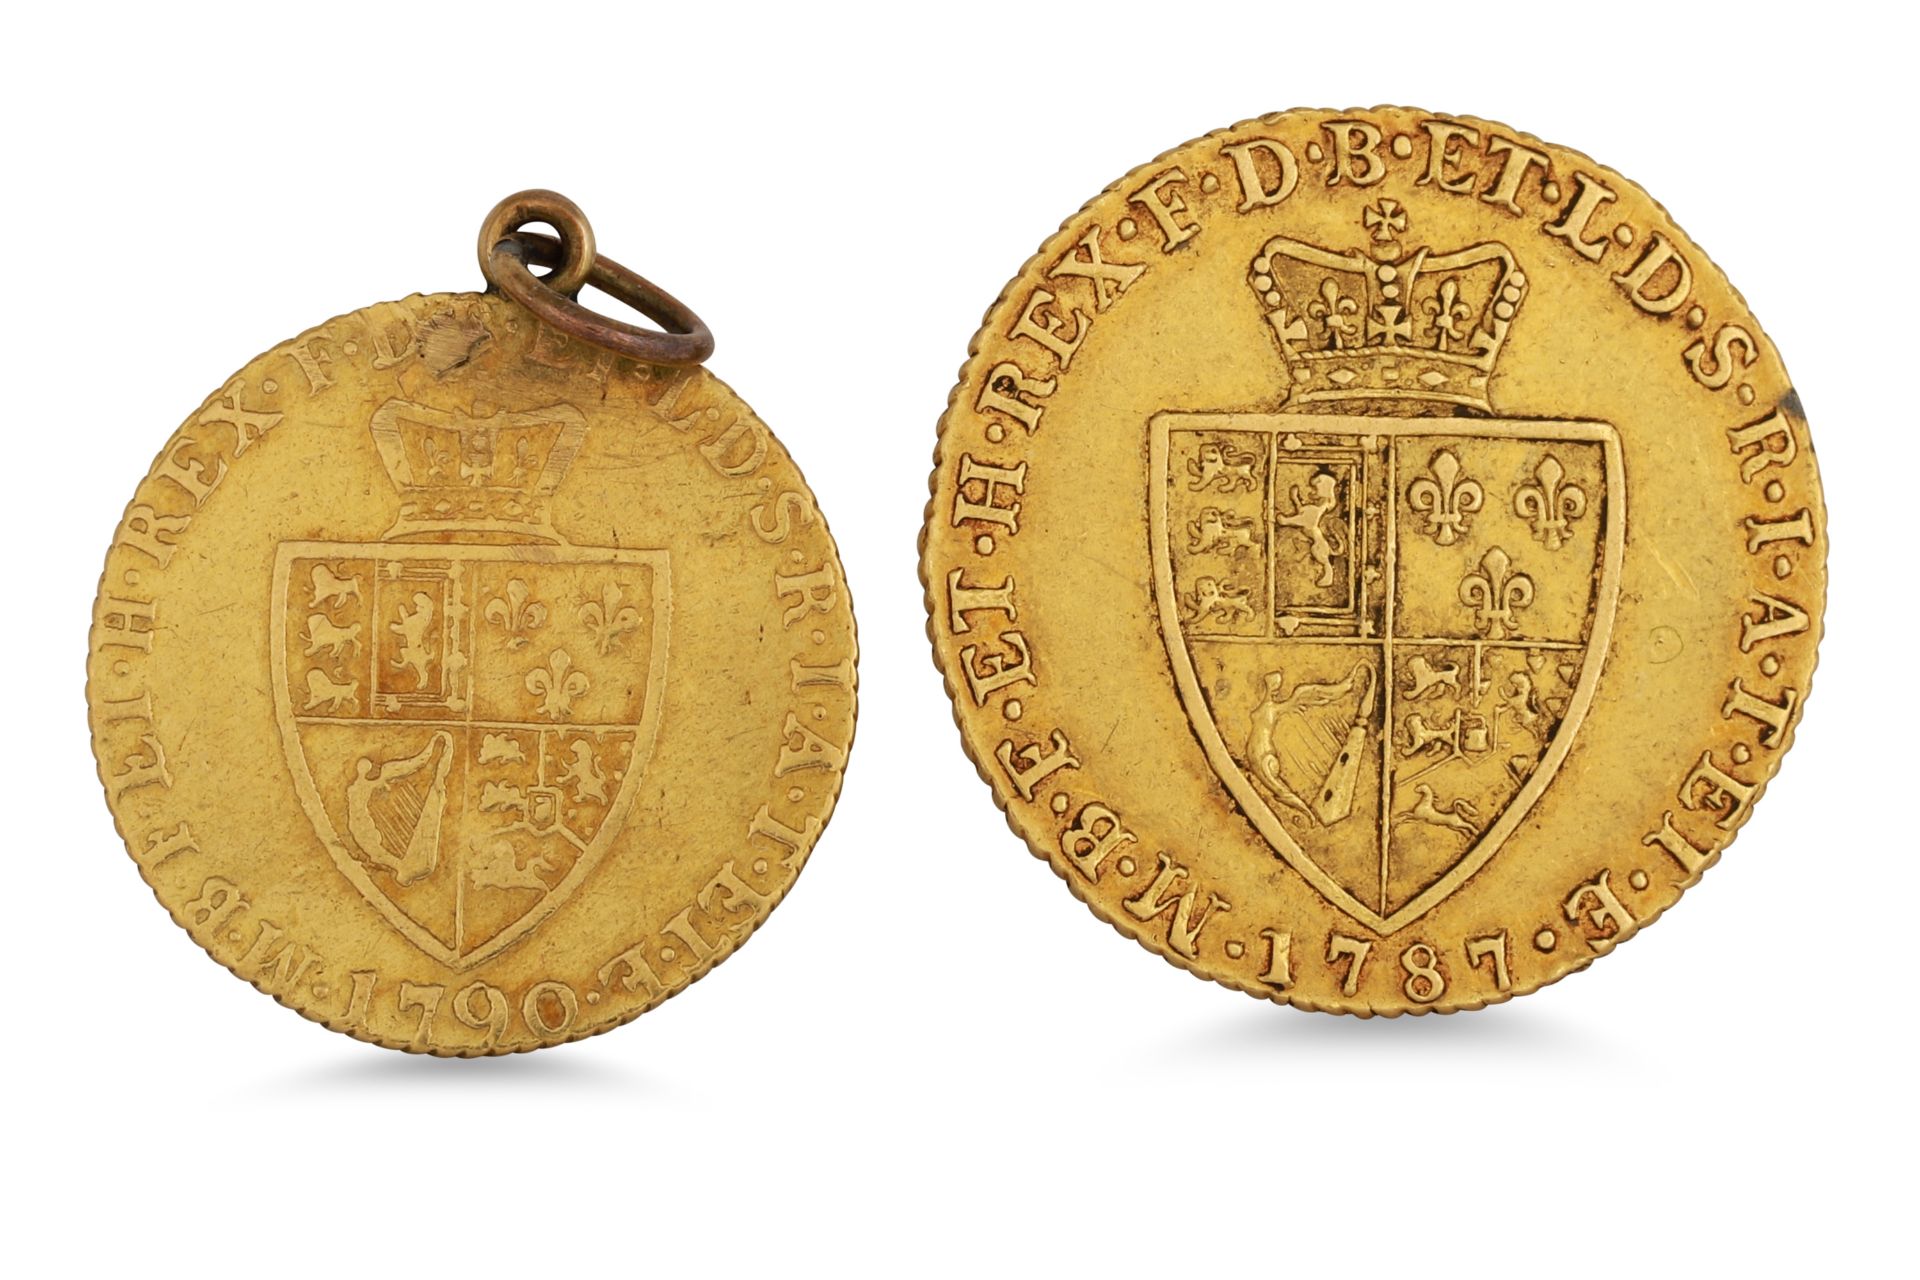 A FULL 1787 ENGLISH GOLD GUINEA COIN VF GEORGE III, plus a 1790 1/2 guinea, on a ring mount, size